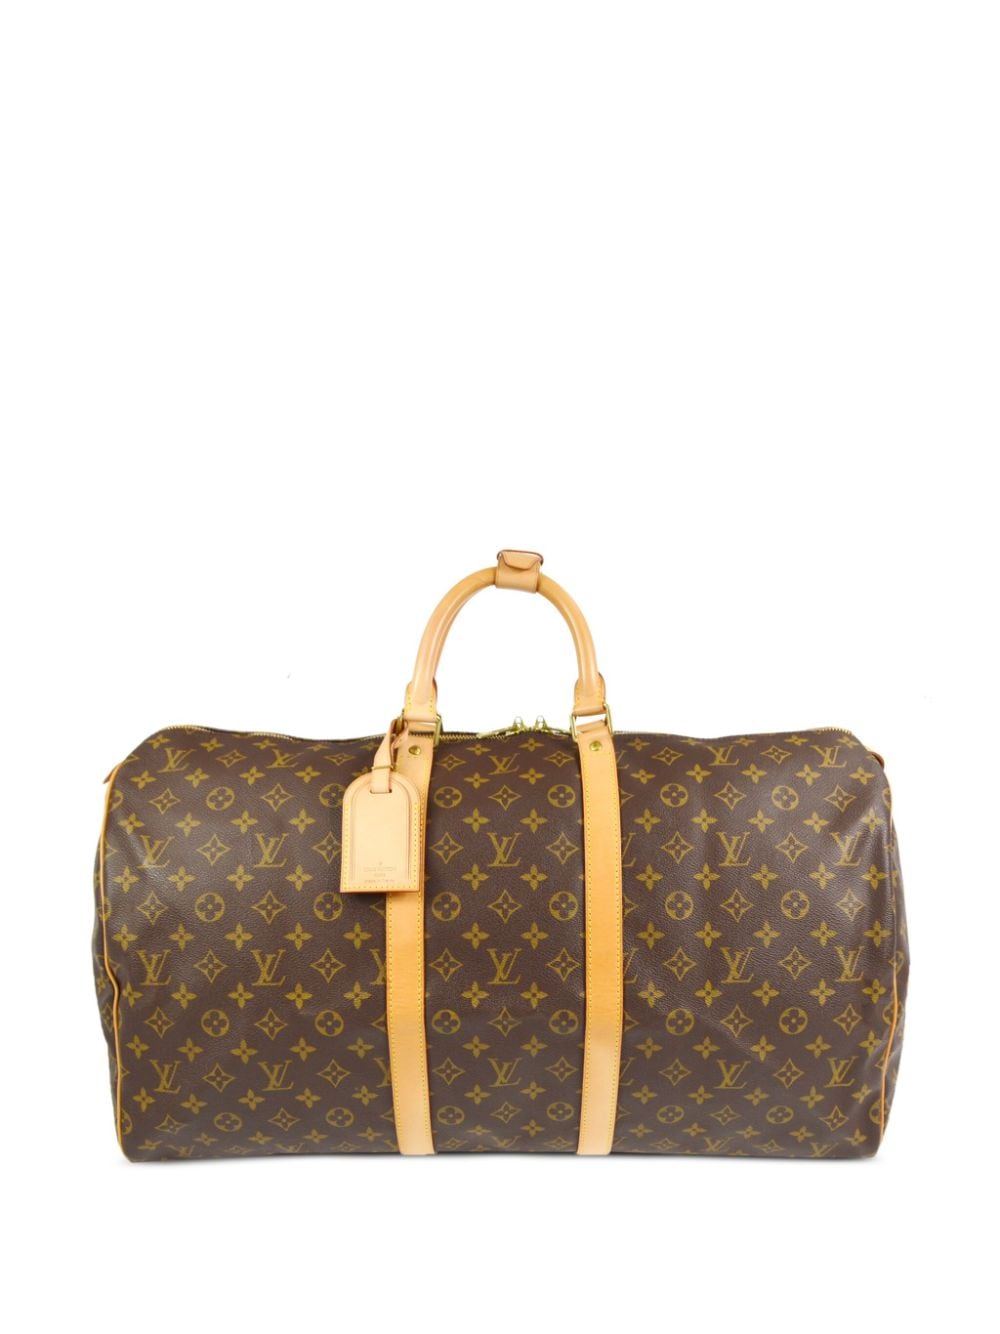 Image 1 of Louis Vuitton Pre-Owned 2000 Monogram Keepall 55 travel bag